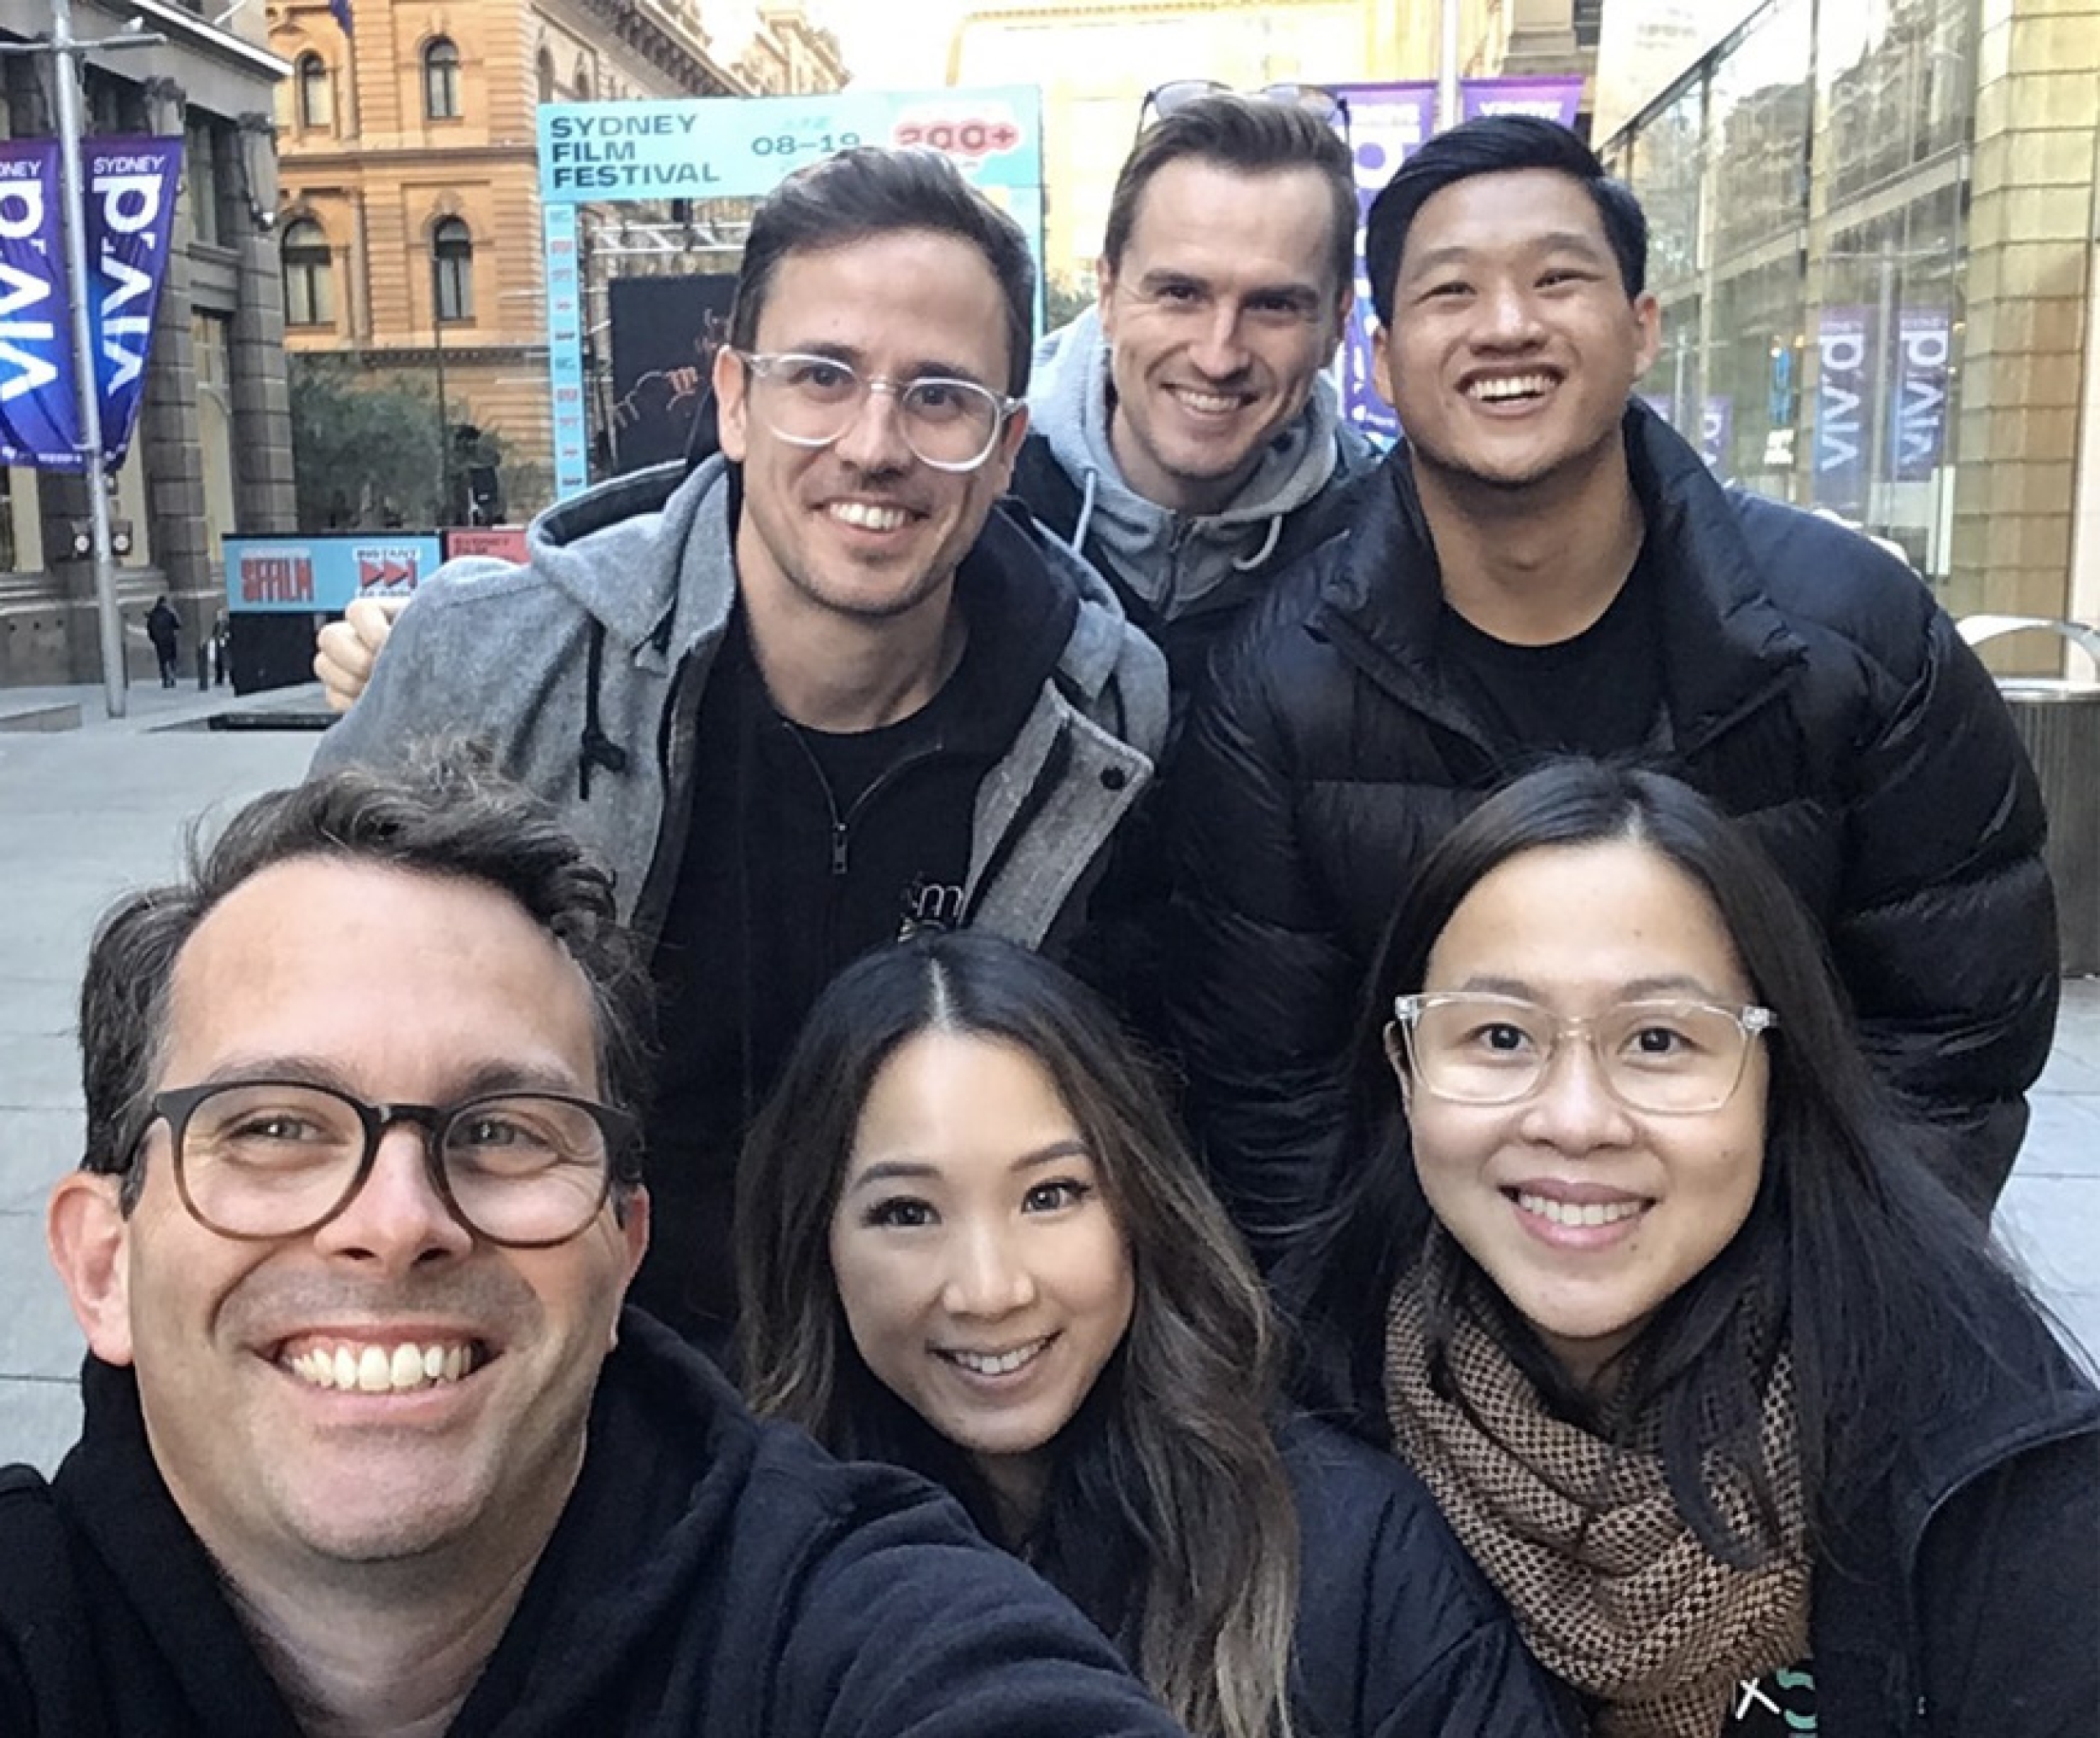 Small group of mx51 colleagues taking a selfie and smiling at the camera.